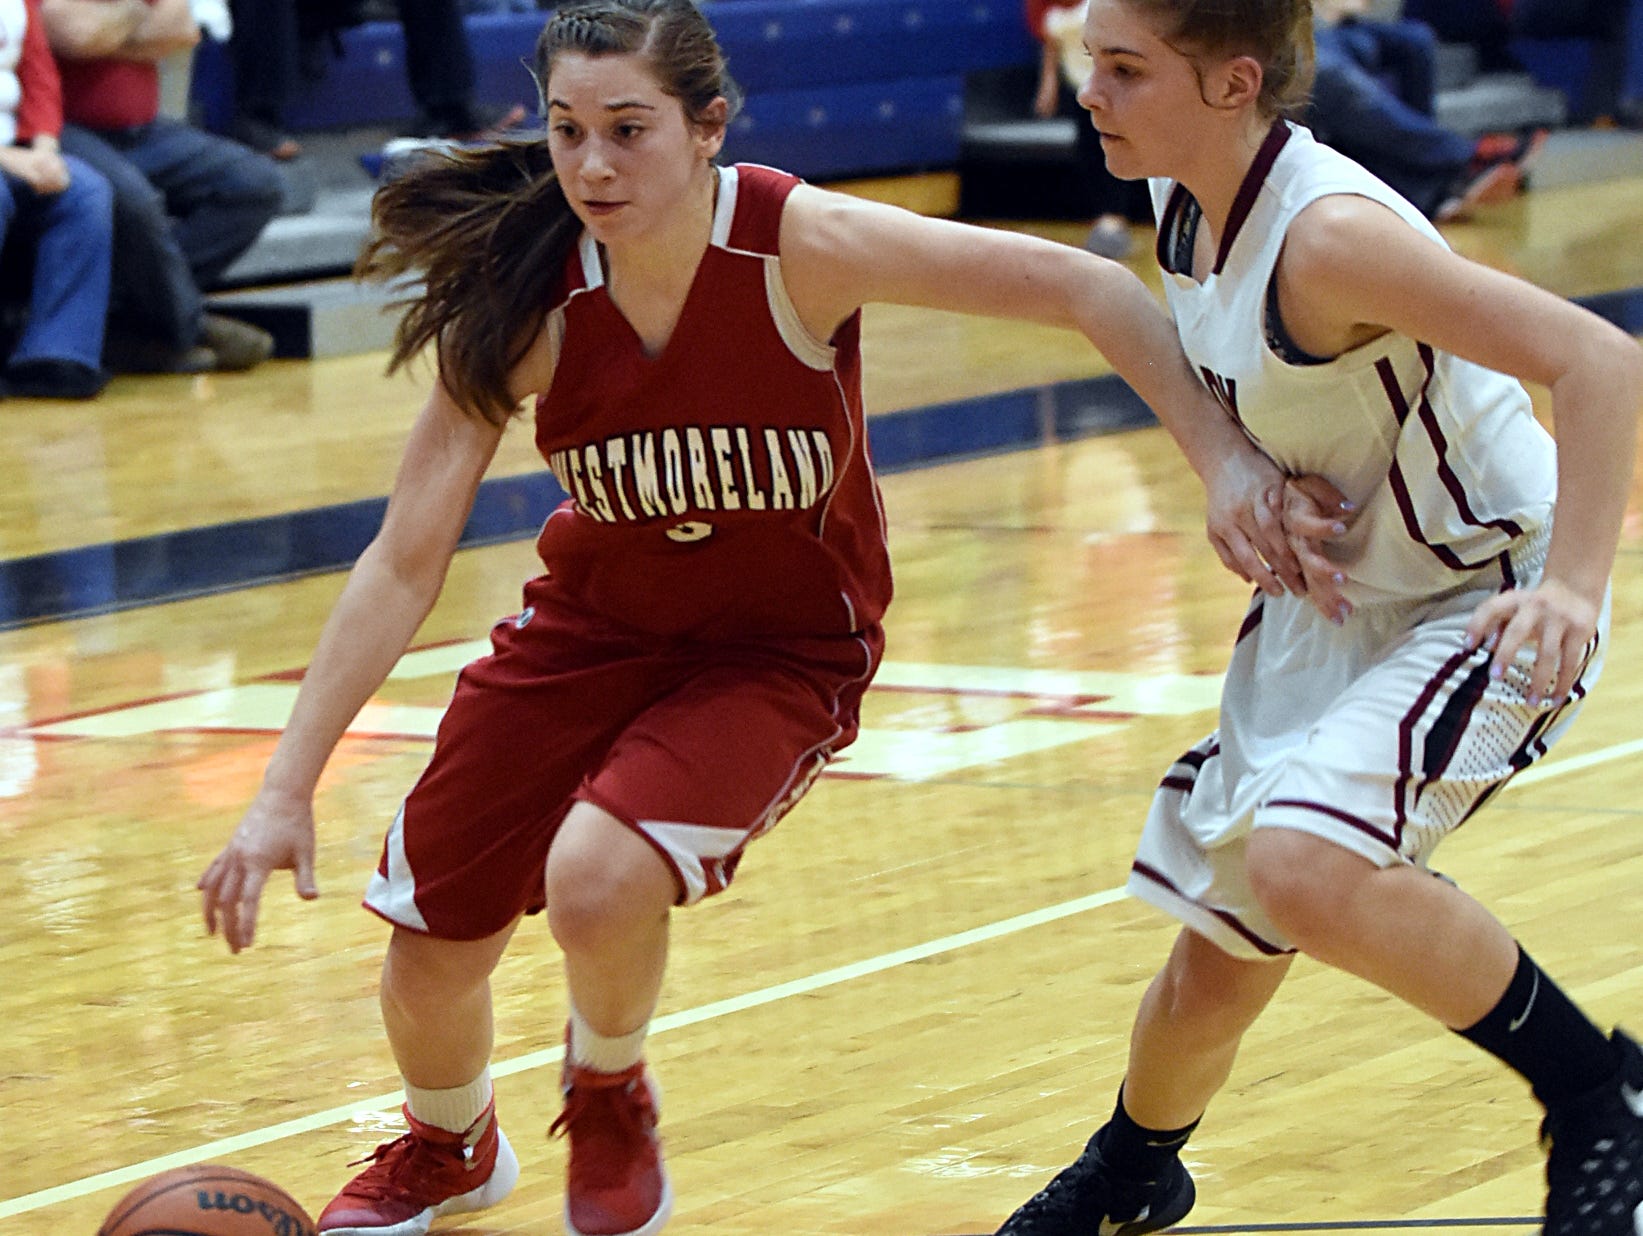 Westmoreland High junior point guard Gracie Oliver dribbles to the basket as Cheatham County freshman Emmy Nelson defends. Oliver scored four points.